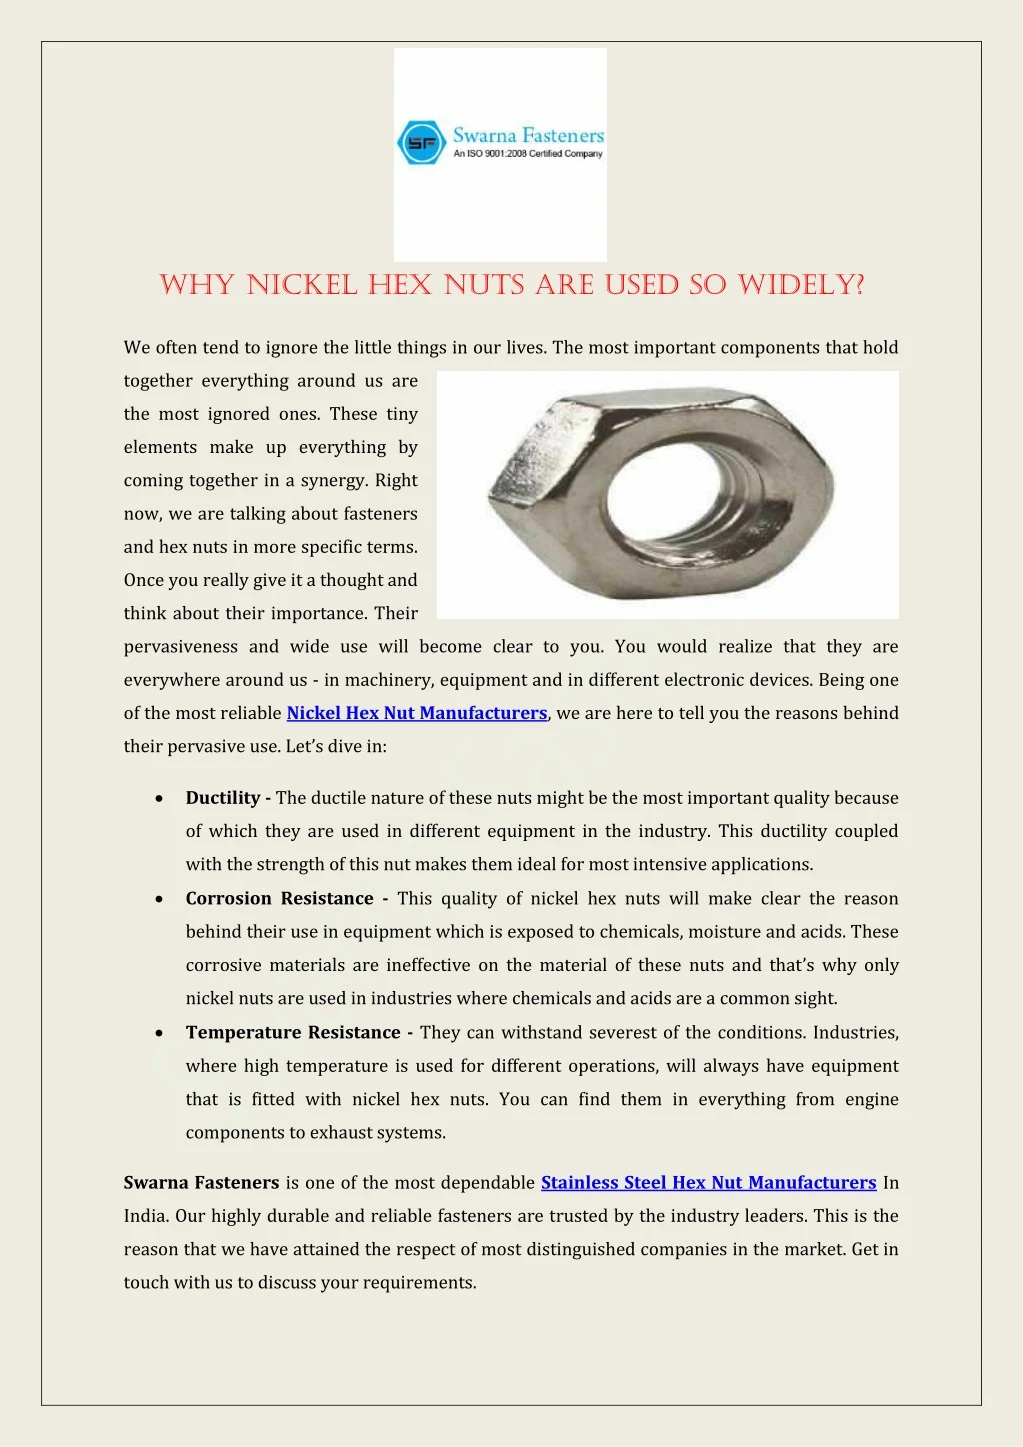 why nickel hex nuts are used so widely